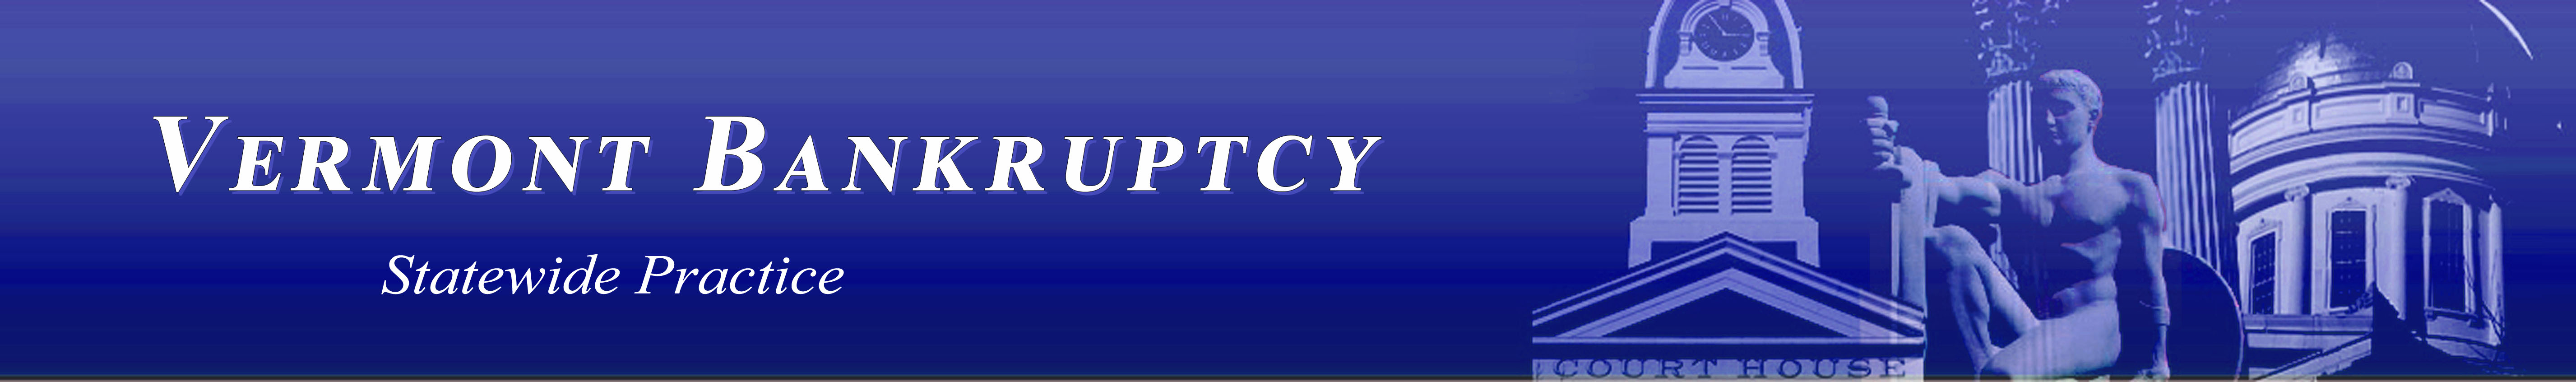 Home Vermont Bankruptcy Law Office